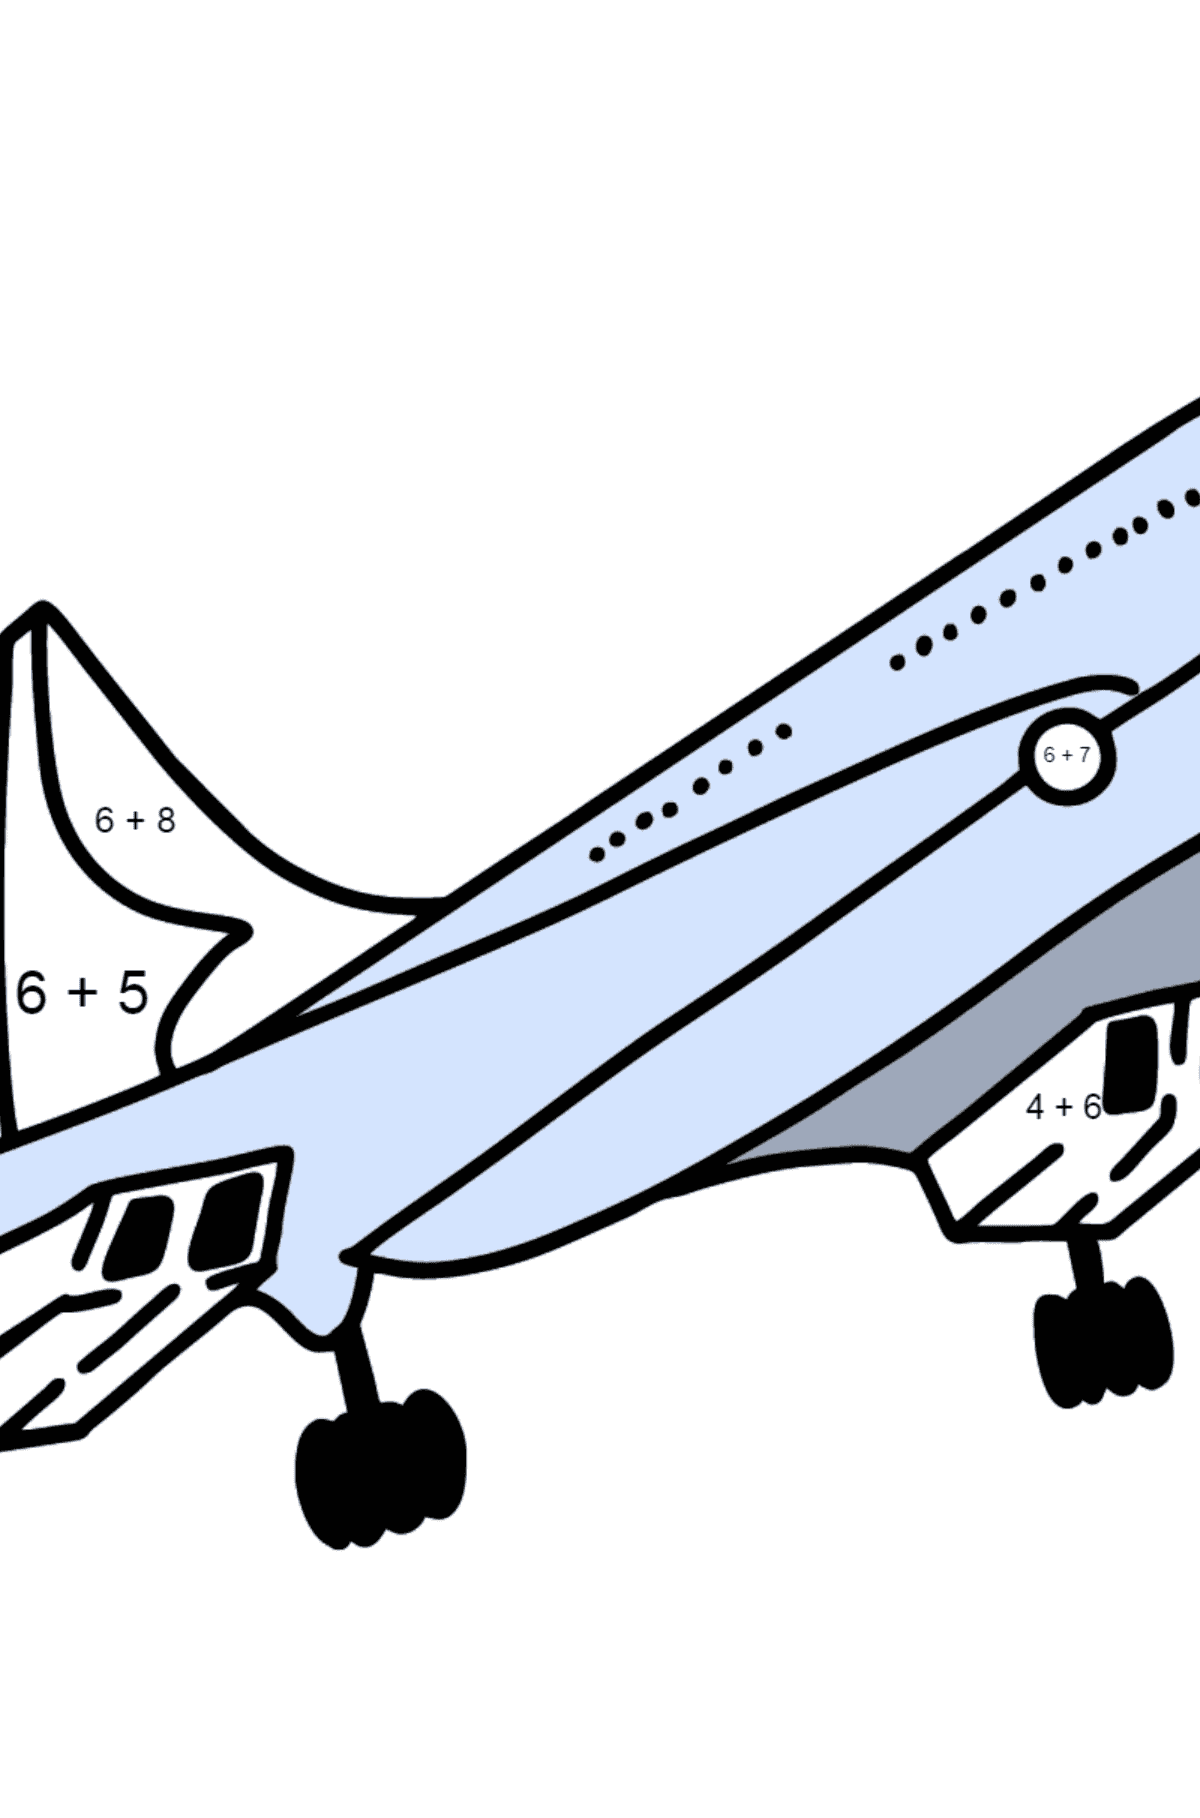 Concorde coloring page - Math Coloring - Addition for Kids